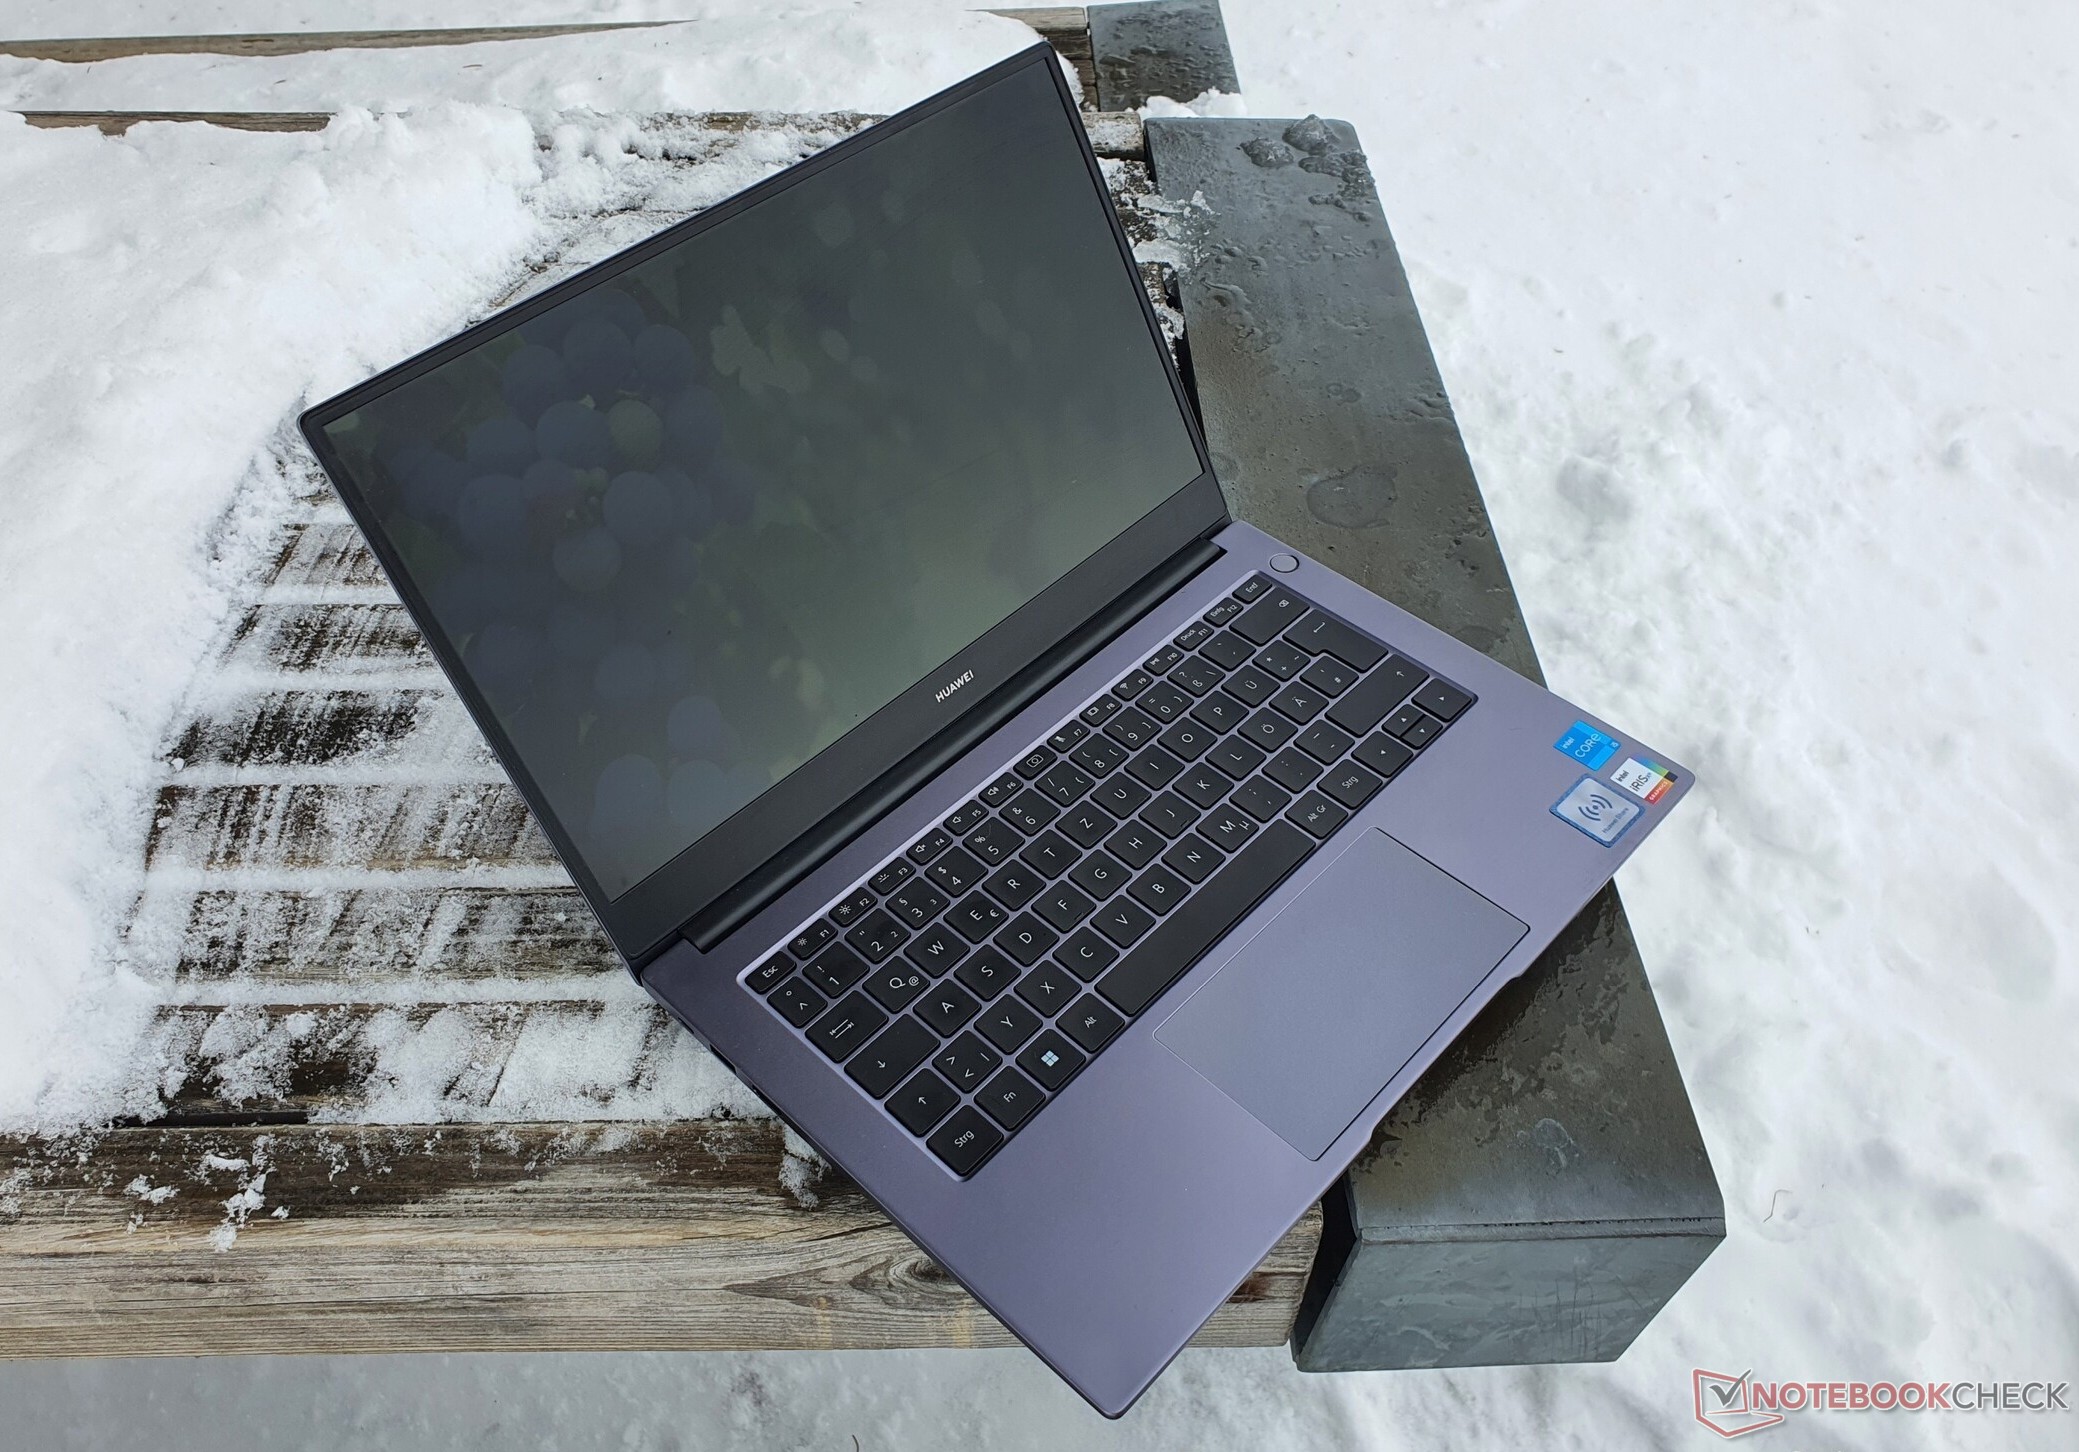 Huawei MateBook D 14 reviewed: Quiet office laptop with long